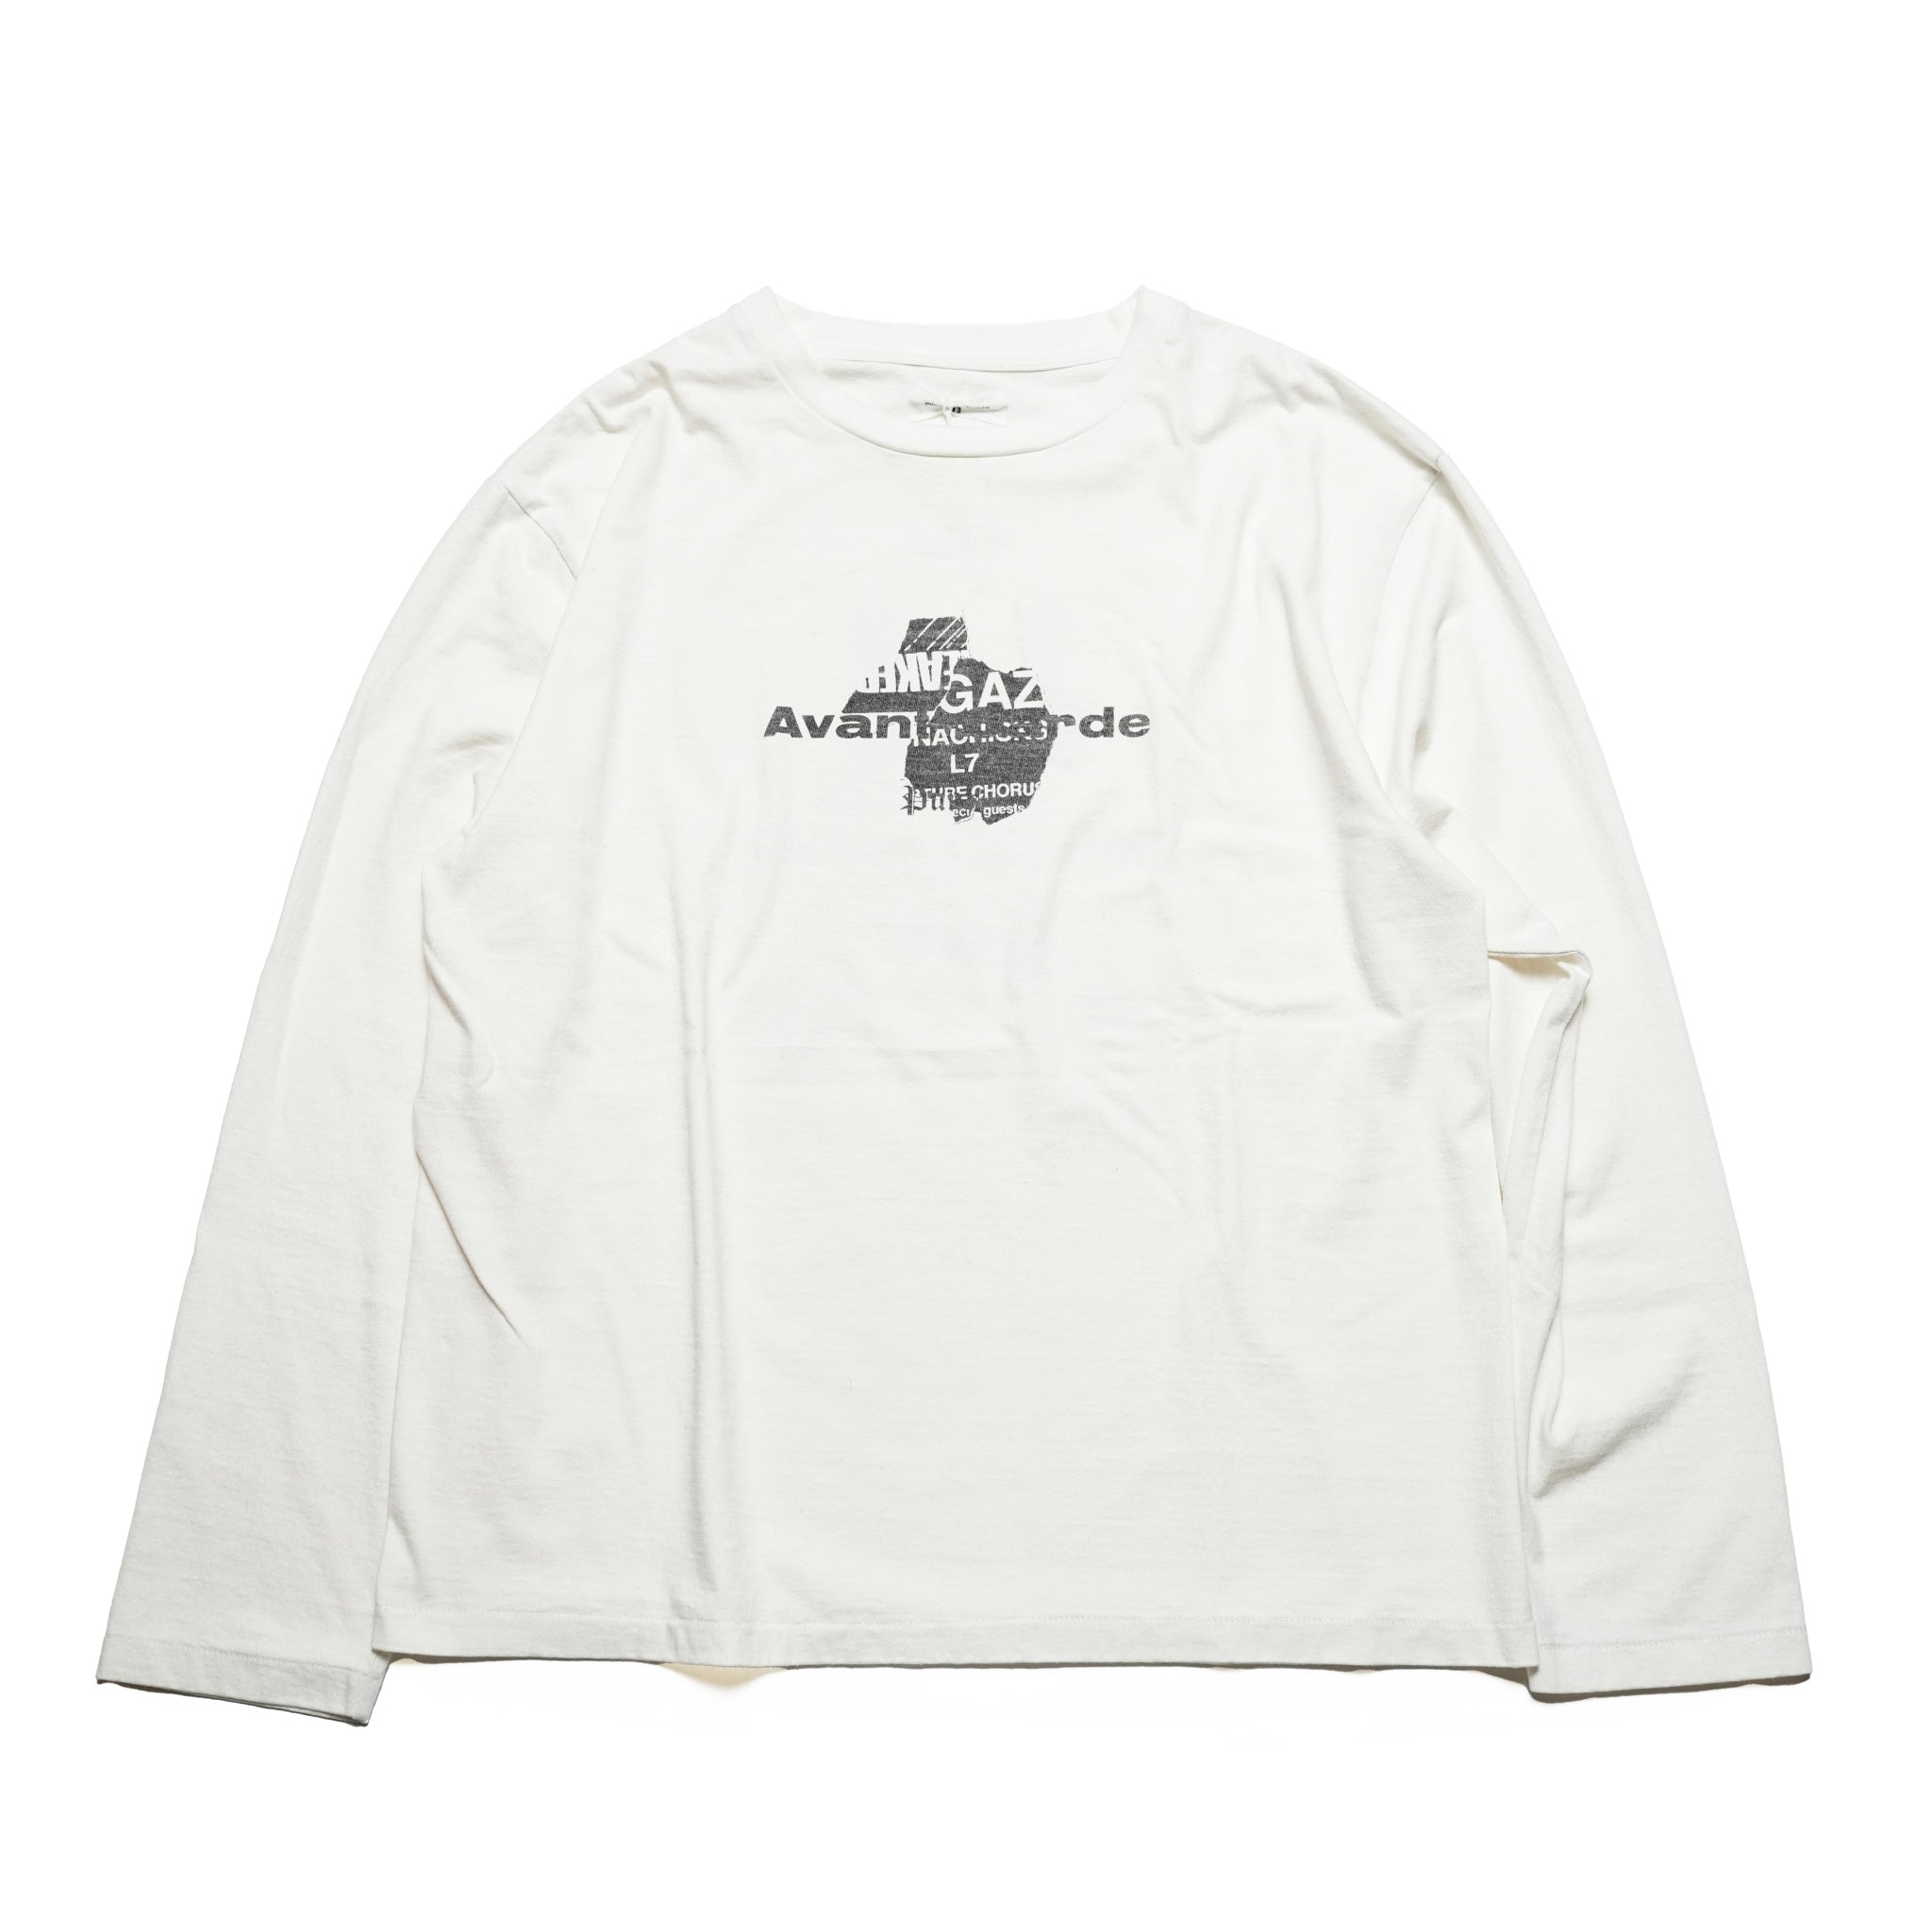 No:24＃03-5A30-0_White | Name:AVANT-GARDE-ロンTEE | Color:White【MINAMI ANDERSON_ミナミアンダーソン】【入荷予定アイテム・入荷連絡可能】